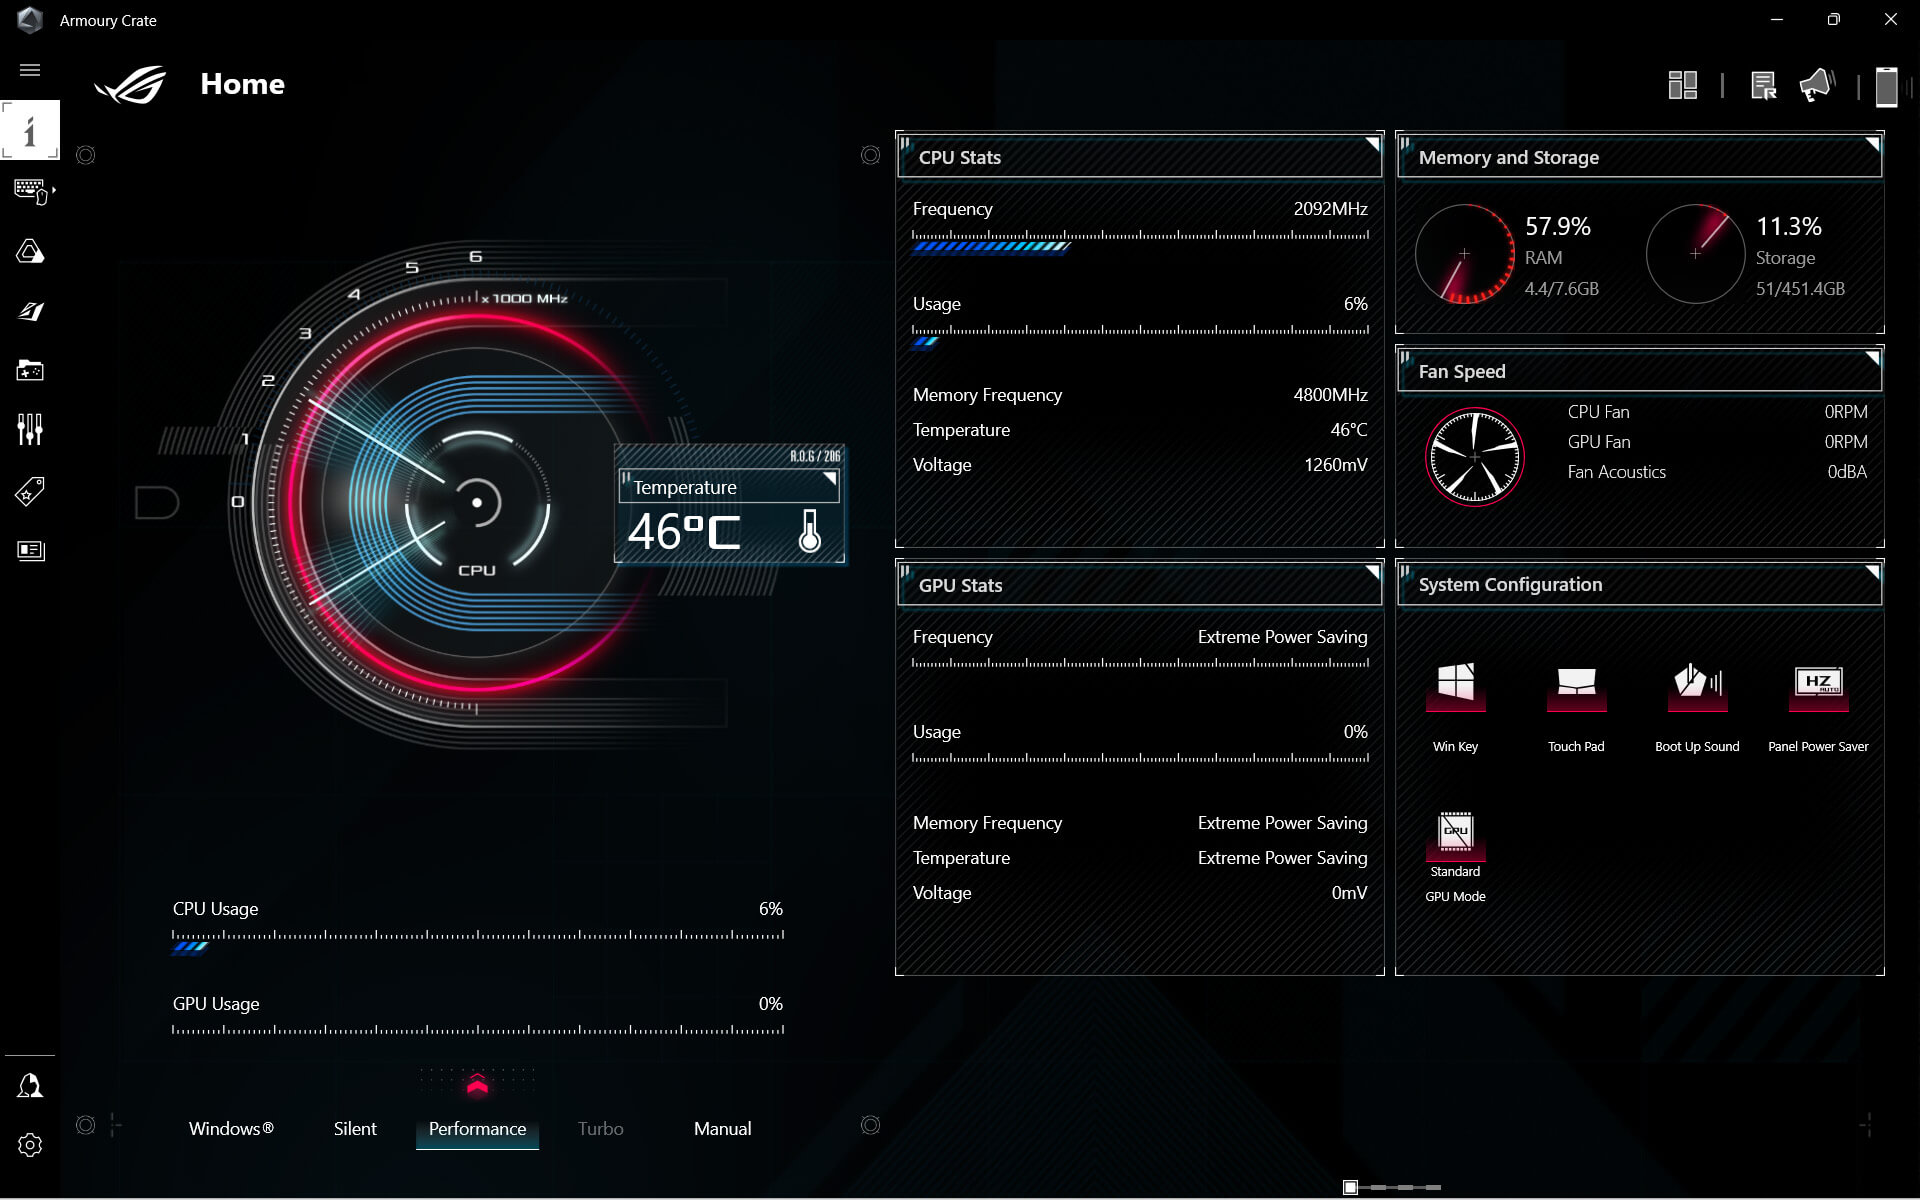 The user interface of Armoury Crate software, showing the system status overview.